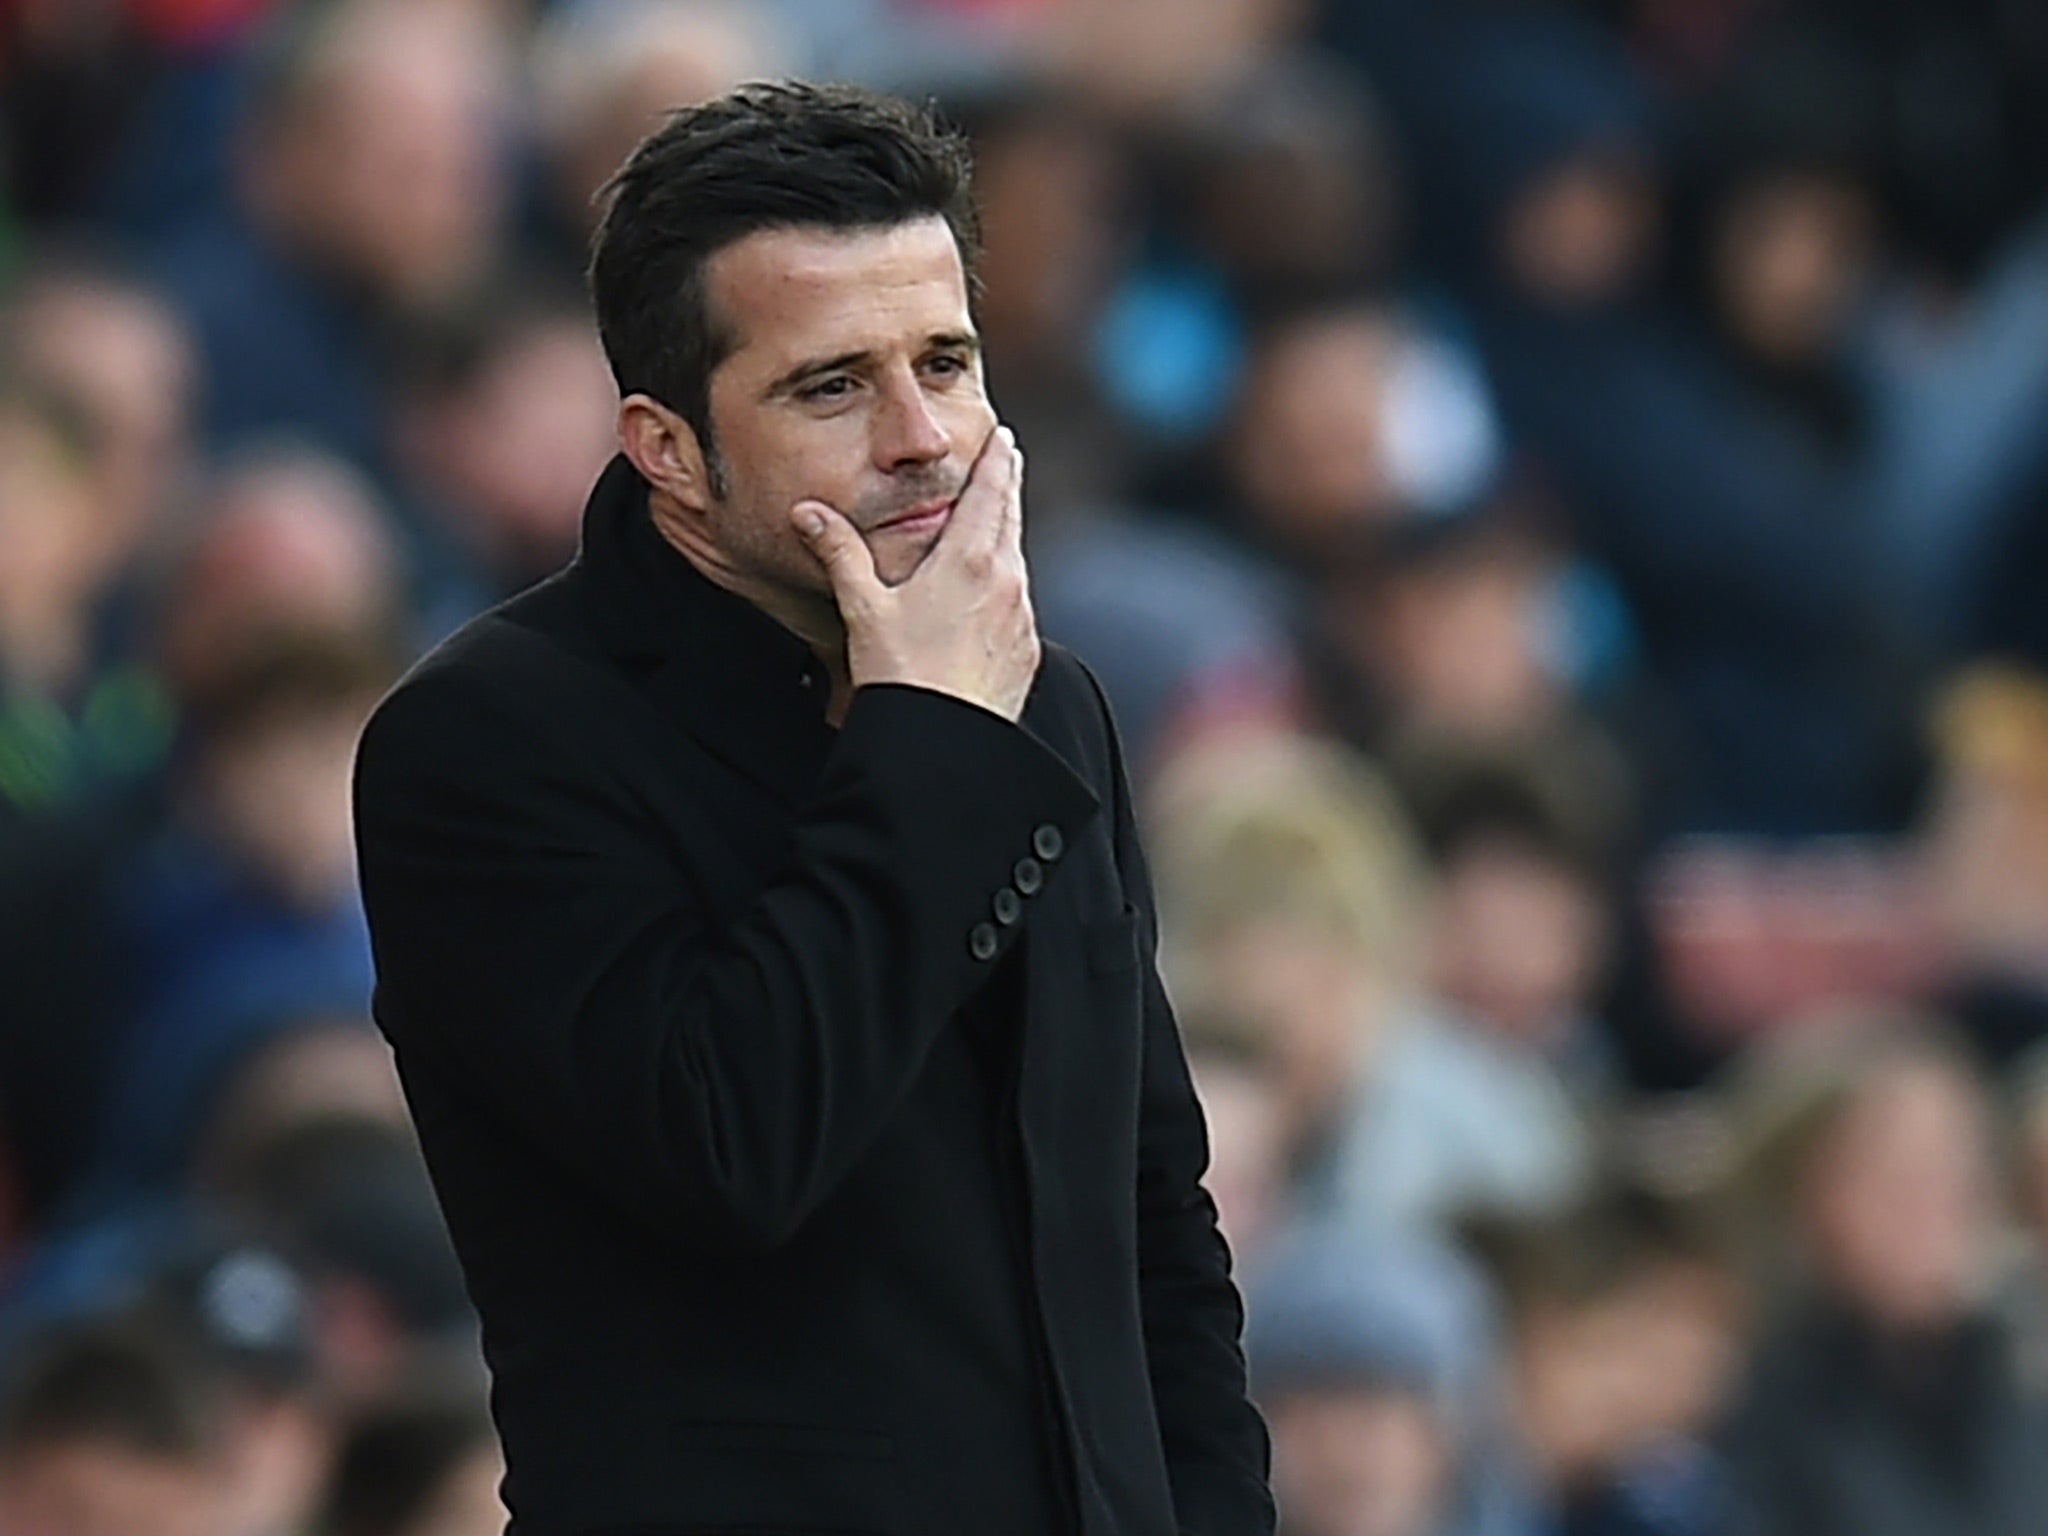 &#13;
Marco Silva has improved Hull - but will it be enough? &#13;